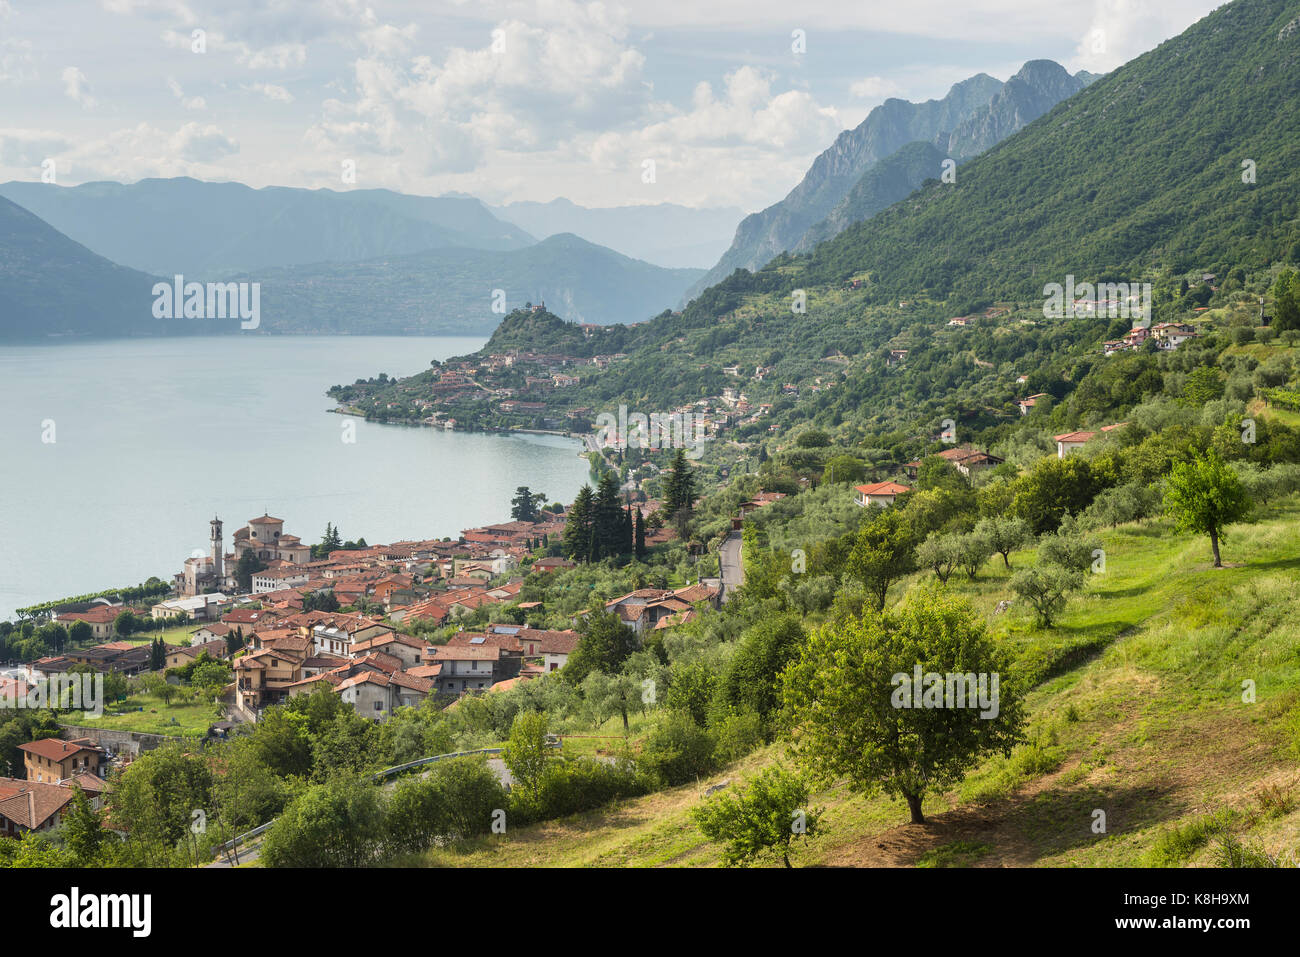 The mediterranean style villages of Sale Marasino and Marone on the shores of Lake Iseo, Lombardy, Italy Stock Photo